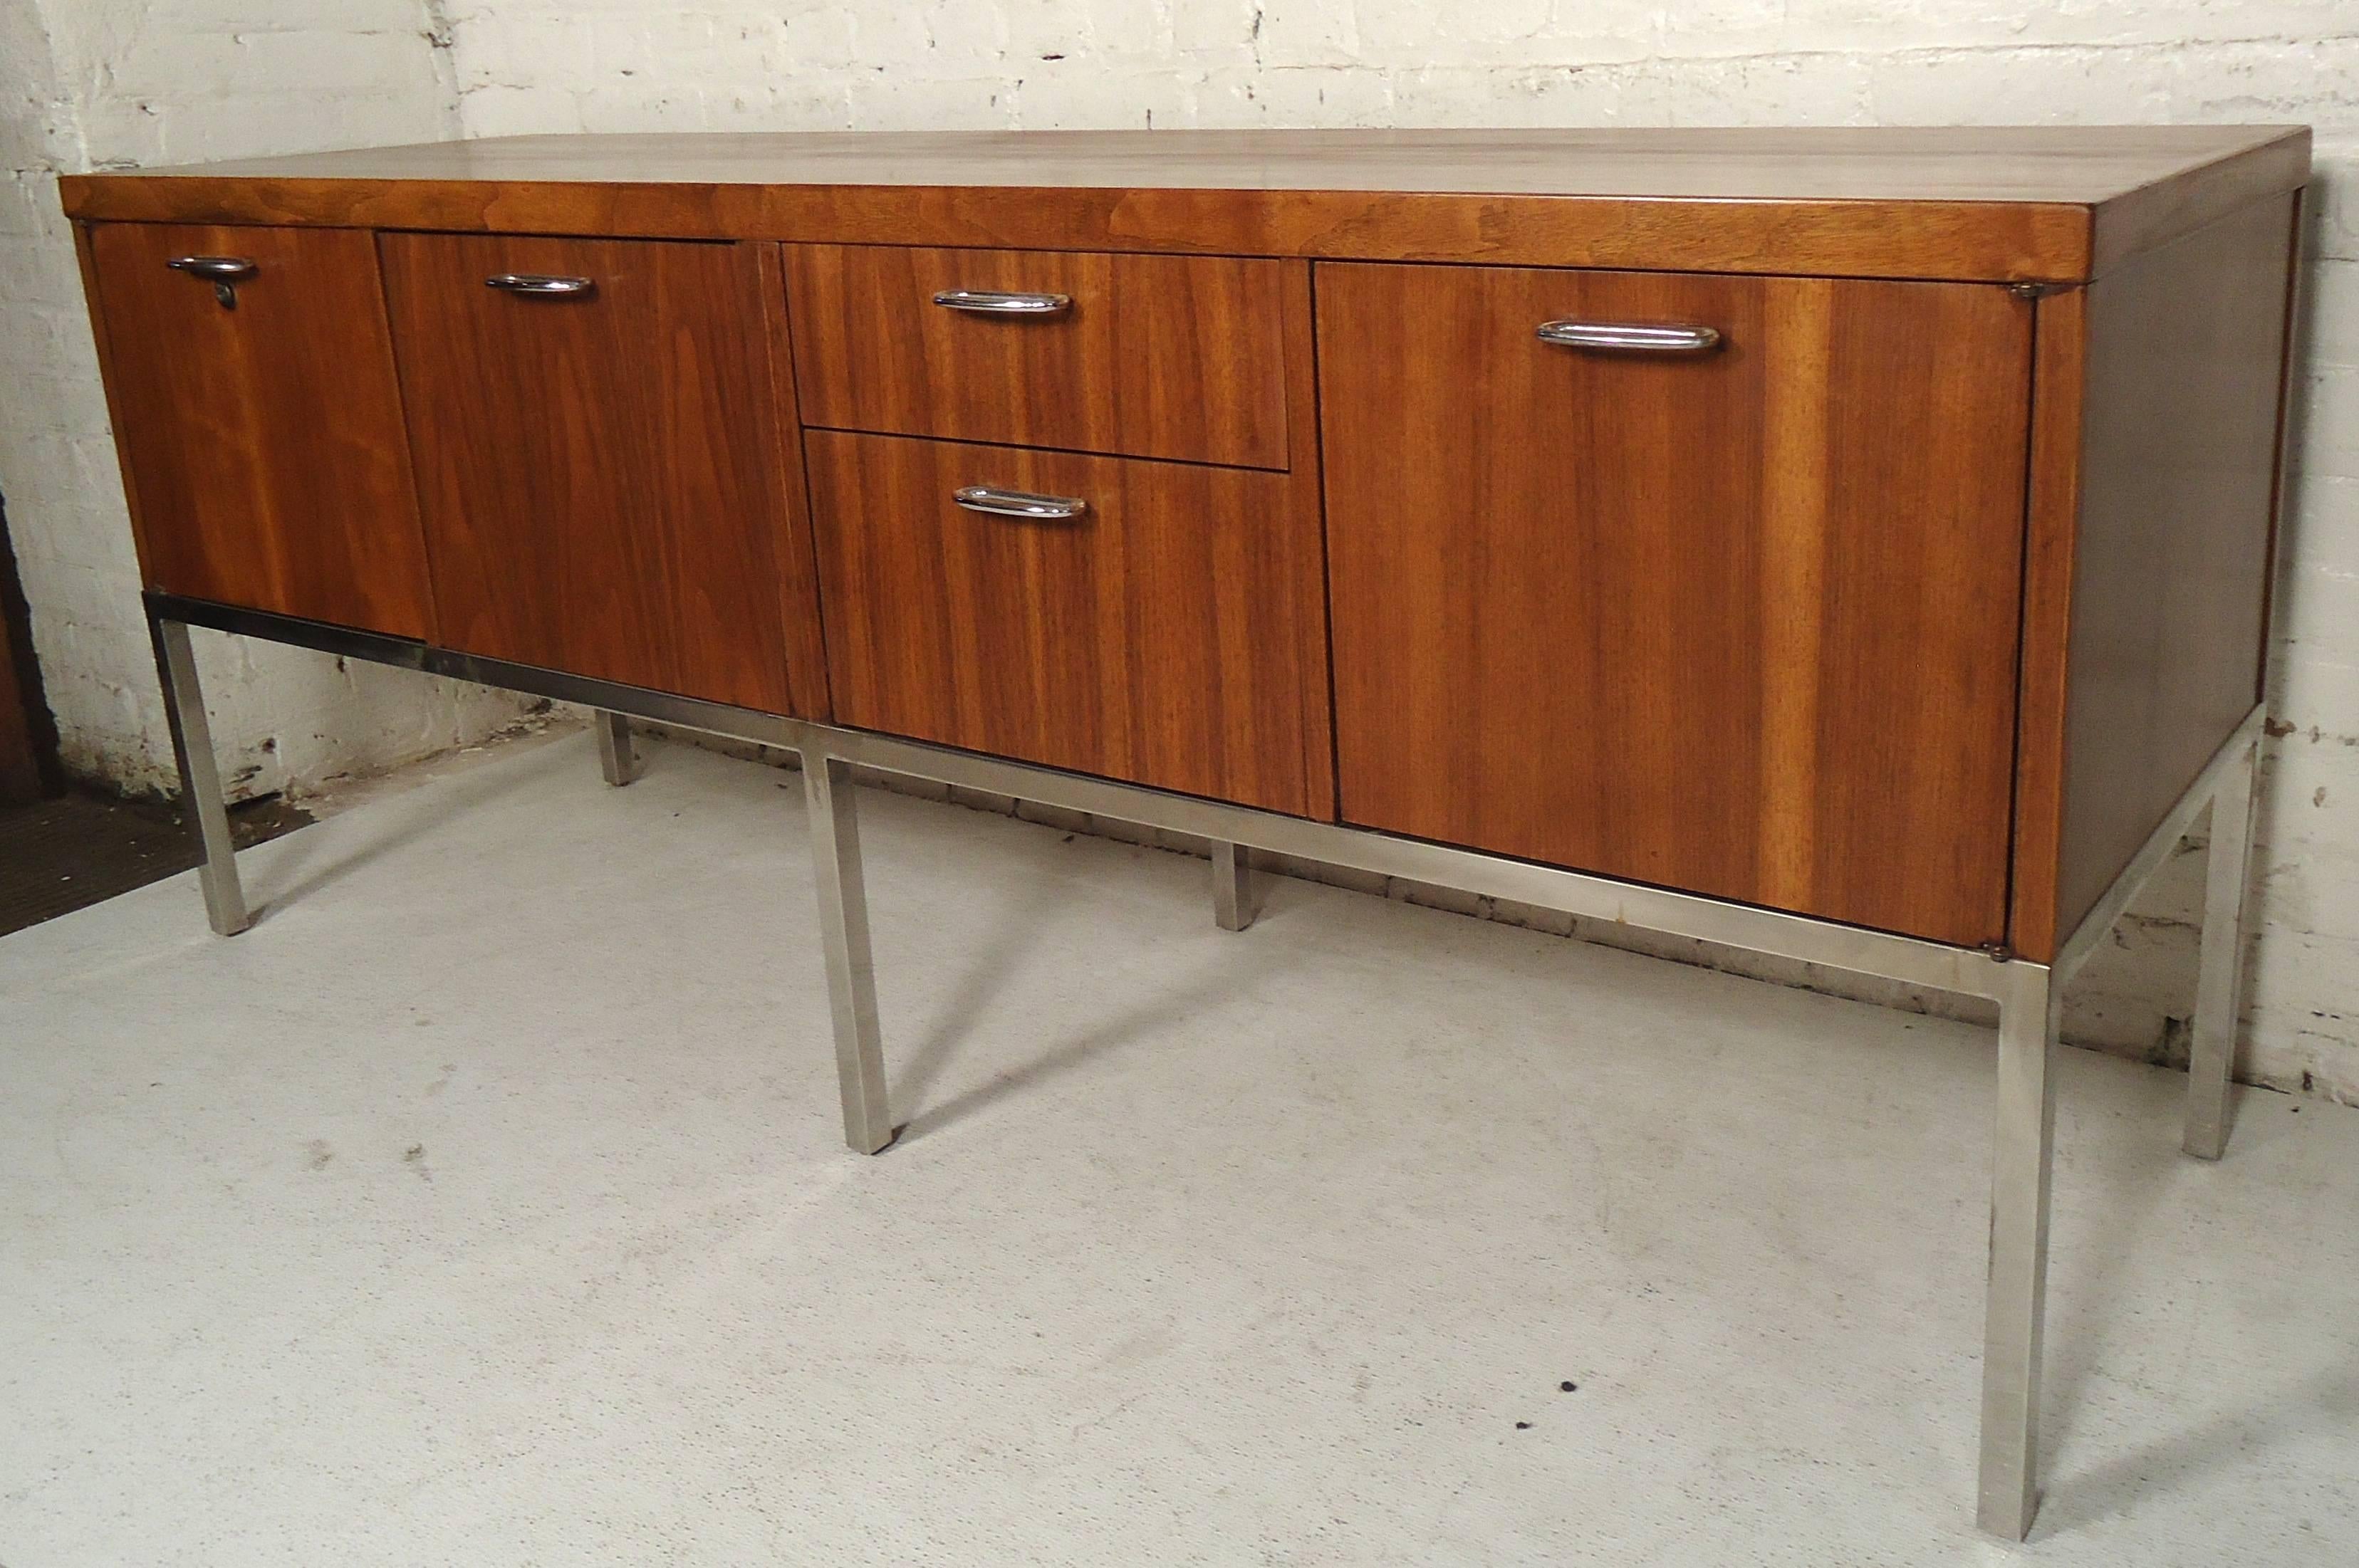 Executive desk and cabinet made by Directional. Features warm walnut grain and polished chrome legs and trim. Ample storage and finished backs.
Measures: Desk 62